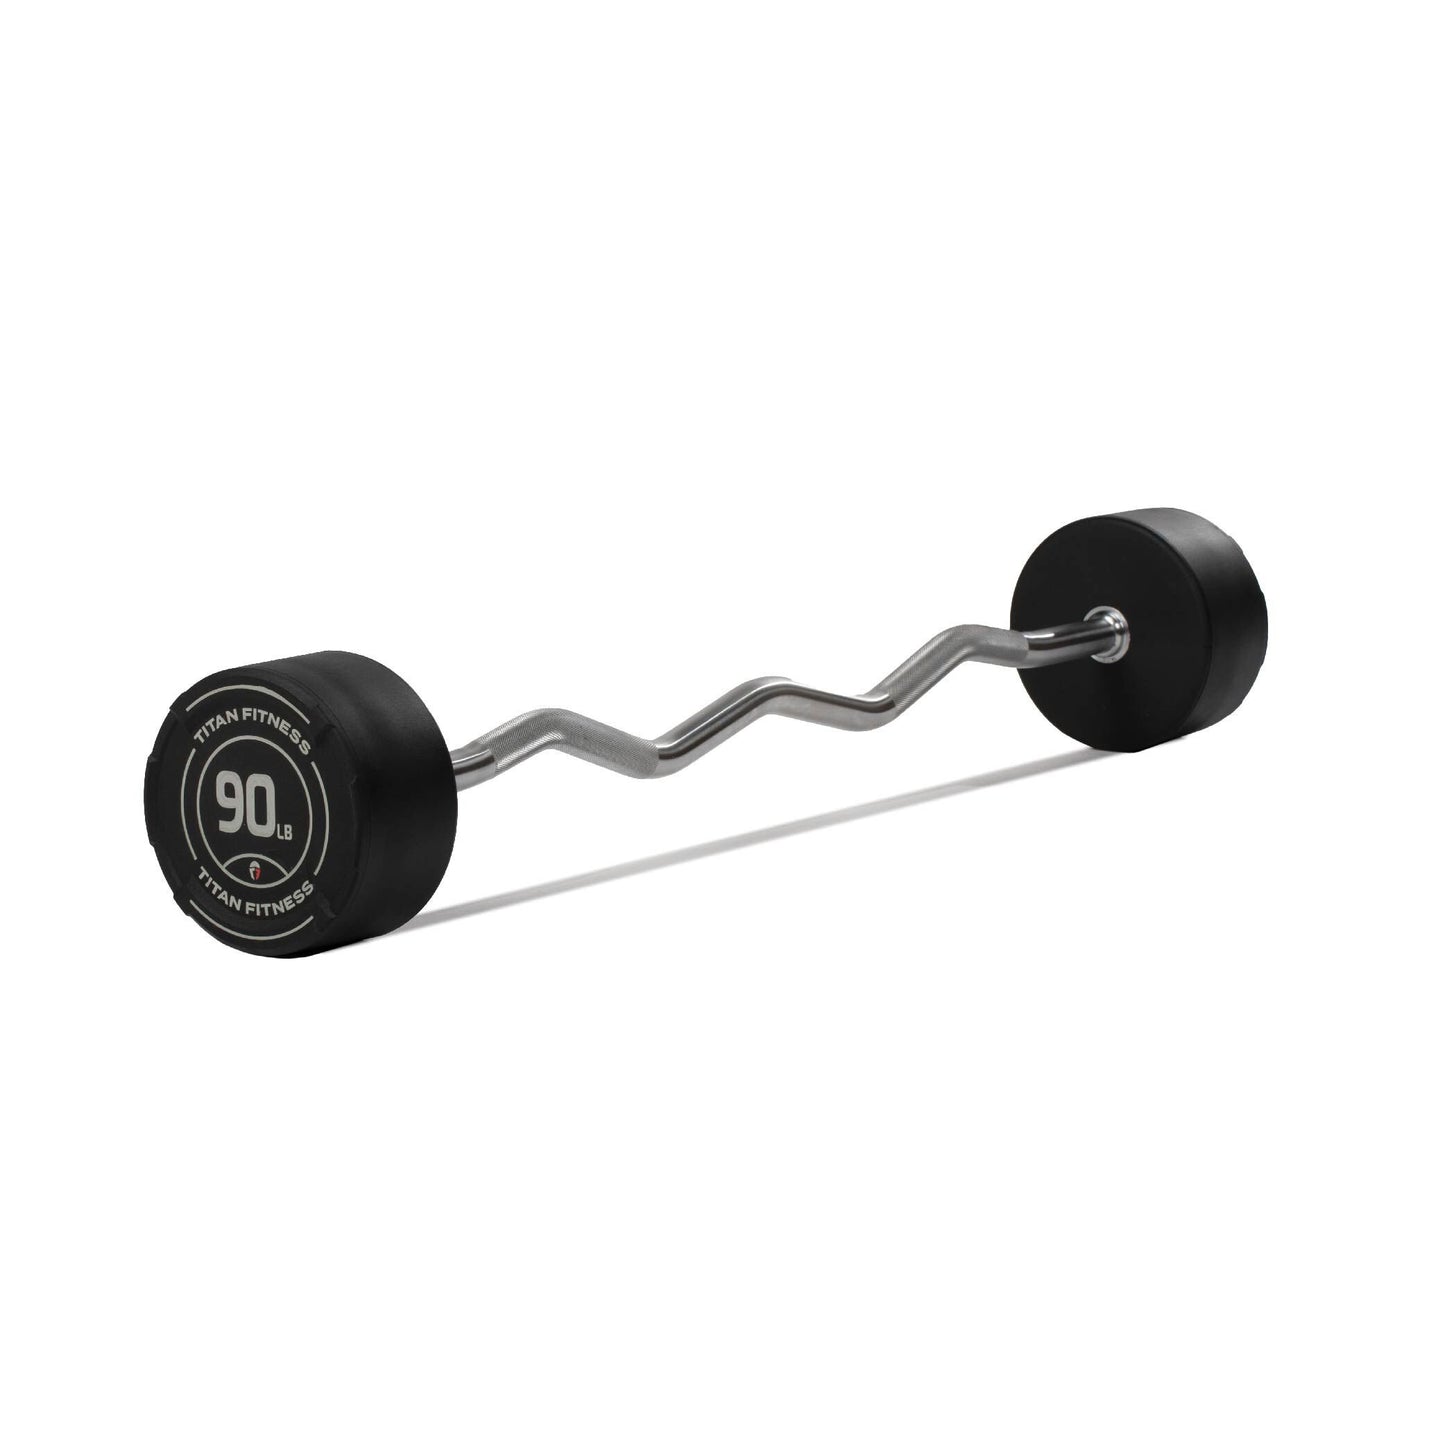 90 LB EZ Curl Fixed Rubber Barbell - view 1